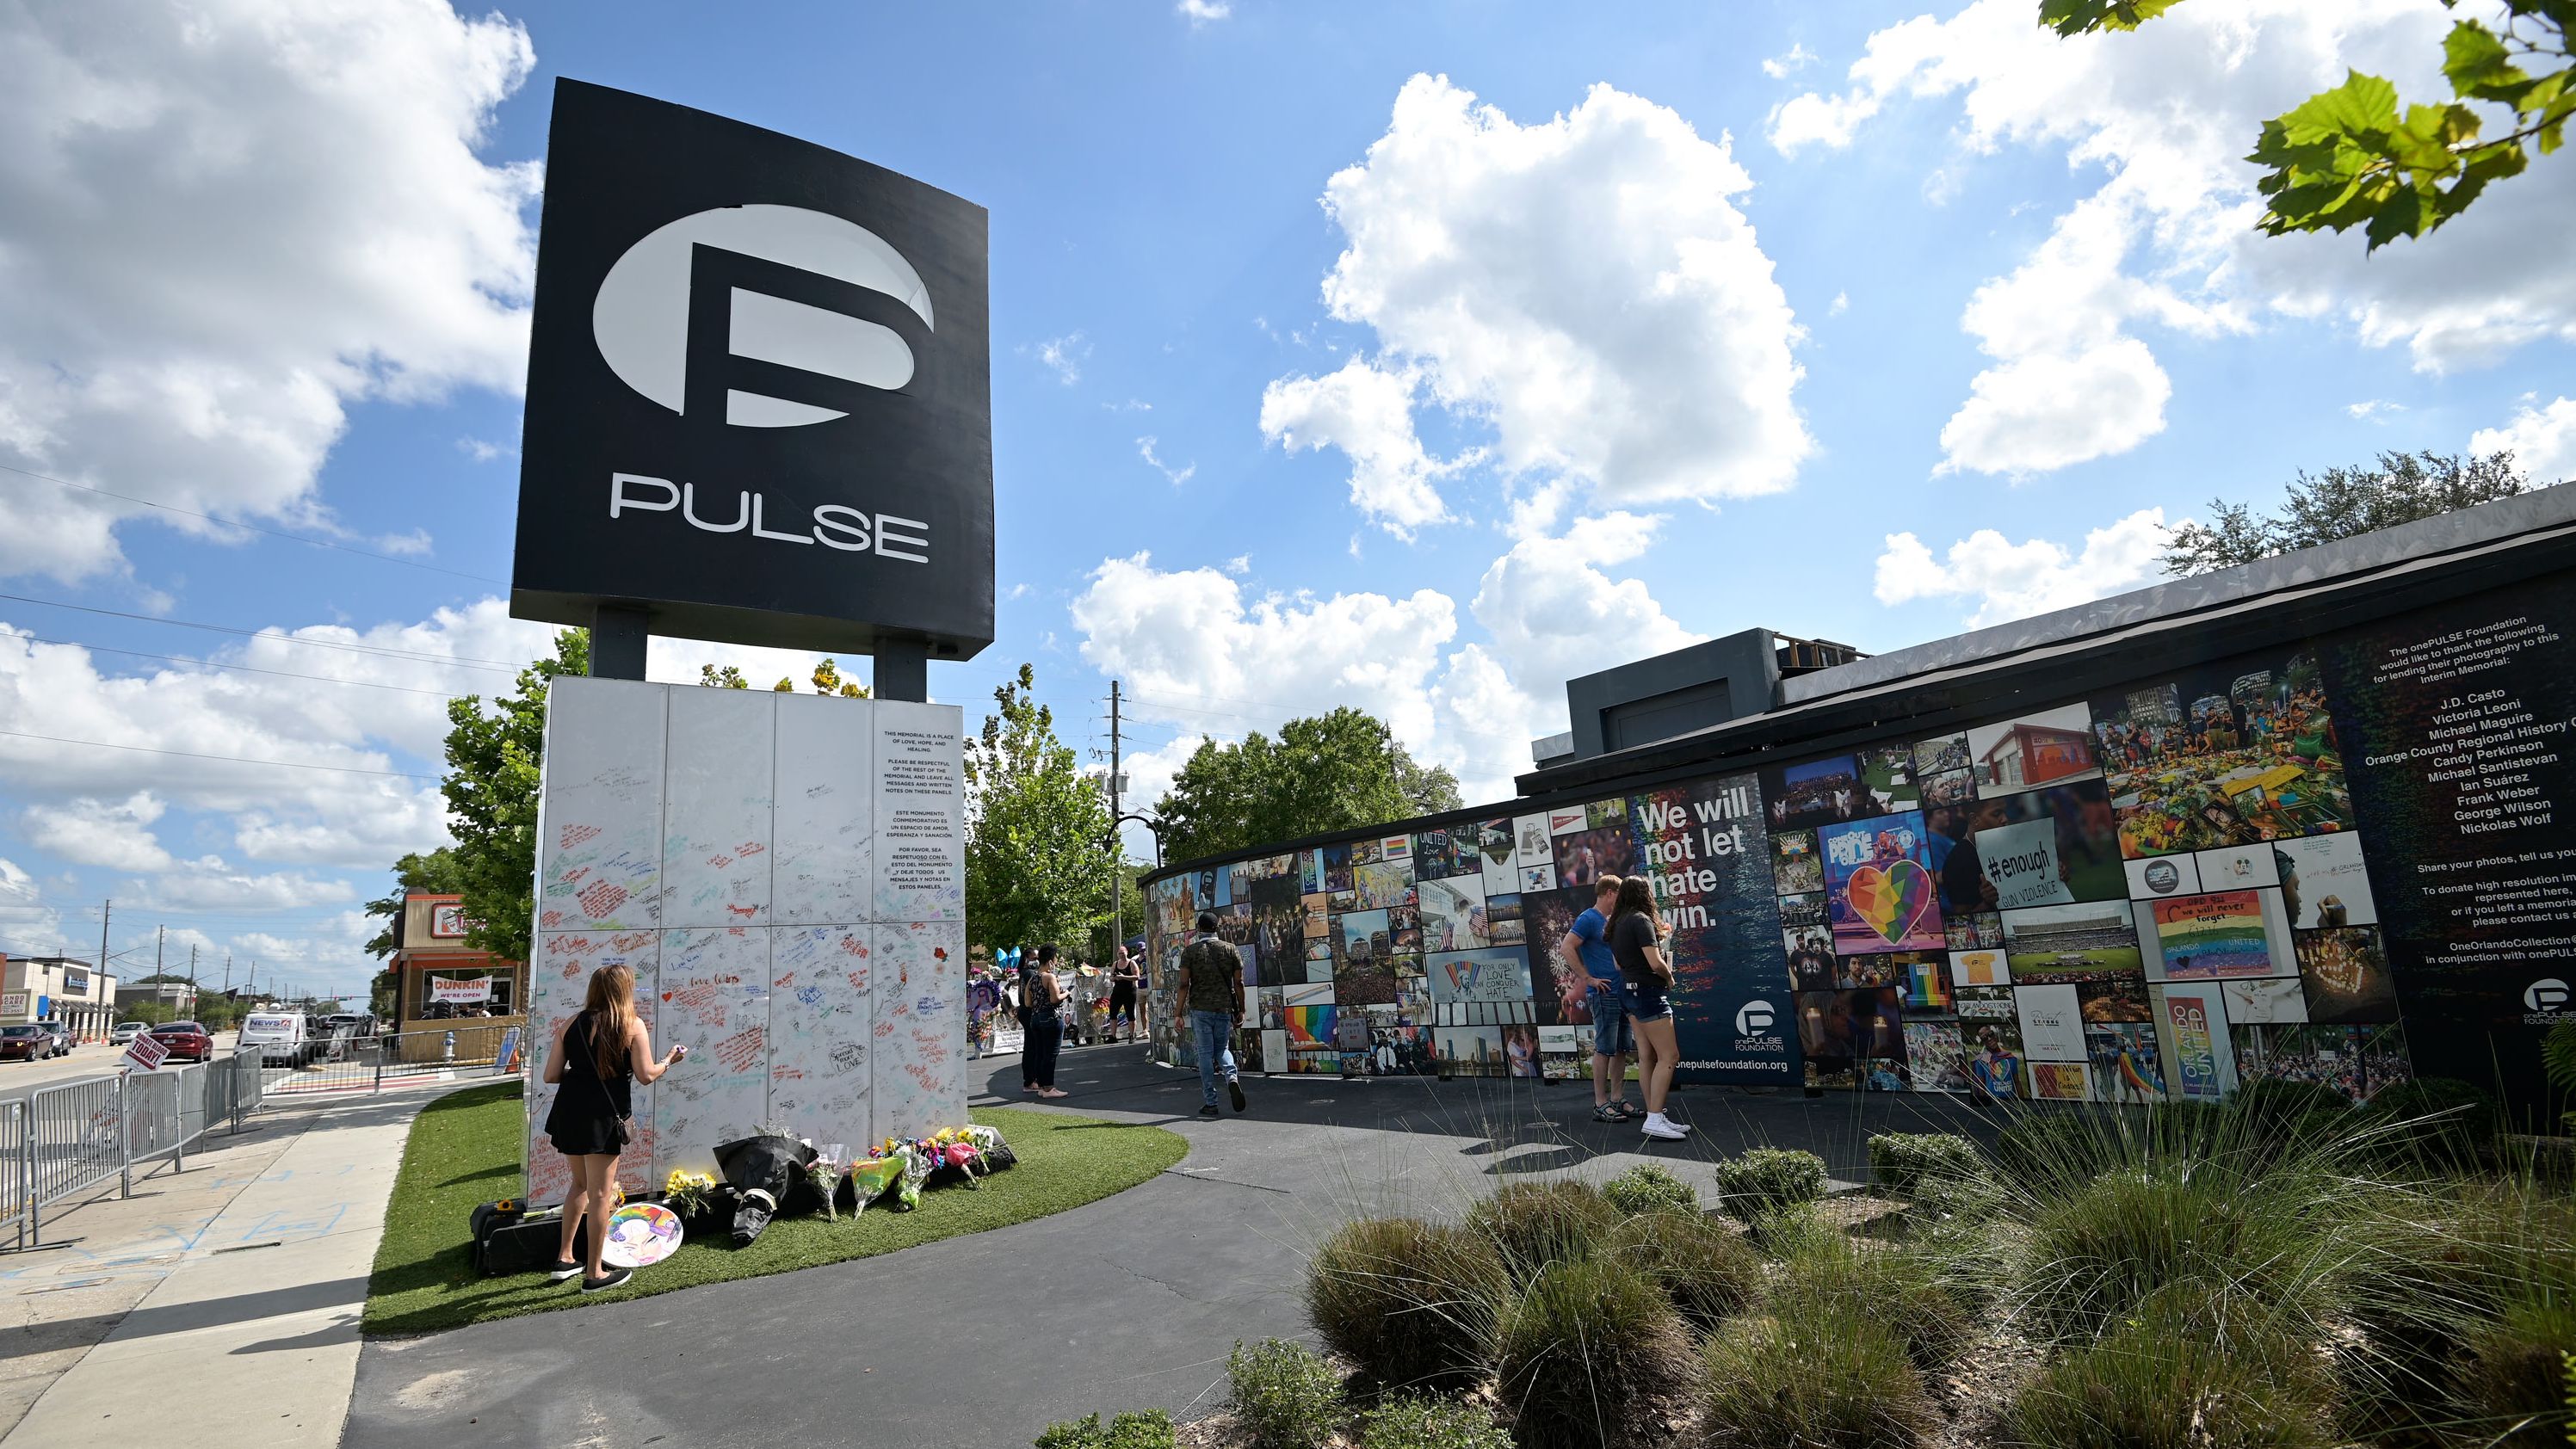 The victims of the mass shooting at Pulse were primarily LGBTQ and Latino. Five years later, queer Latinos in Orlando are still healing as they change their city for the better.